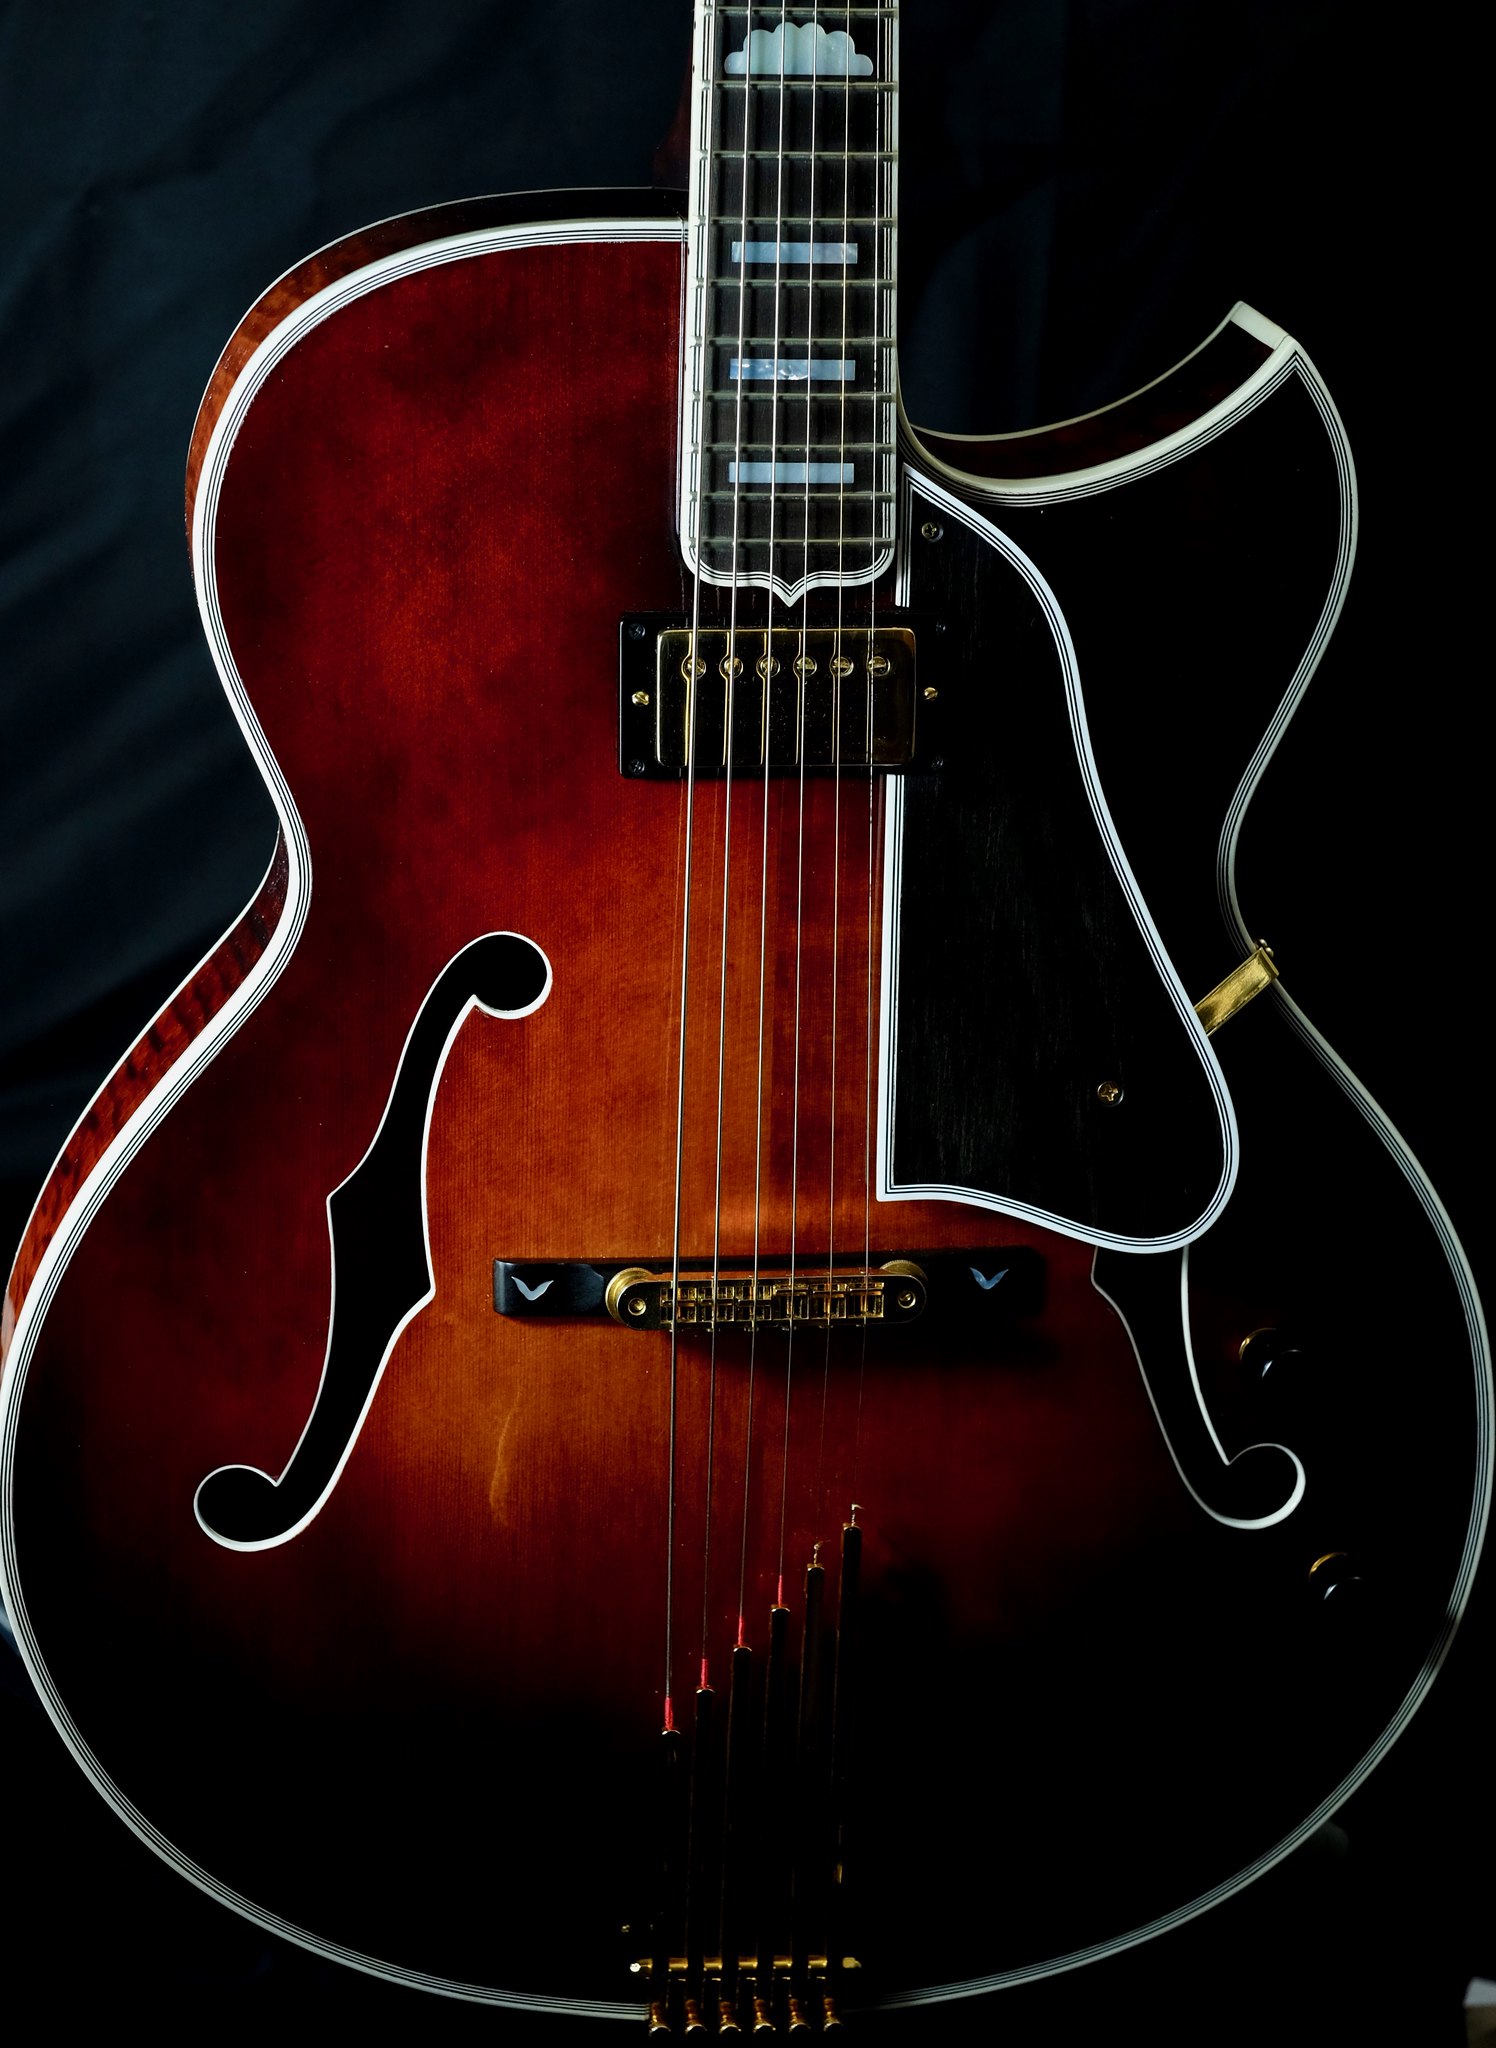 Two good things about Heritage guitars-77eac5a9-5520-4438-8957-5ac31df5c7d7-jpeg